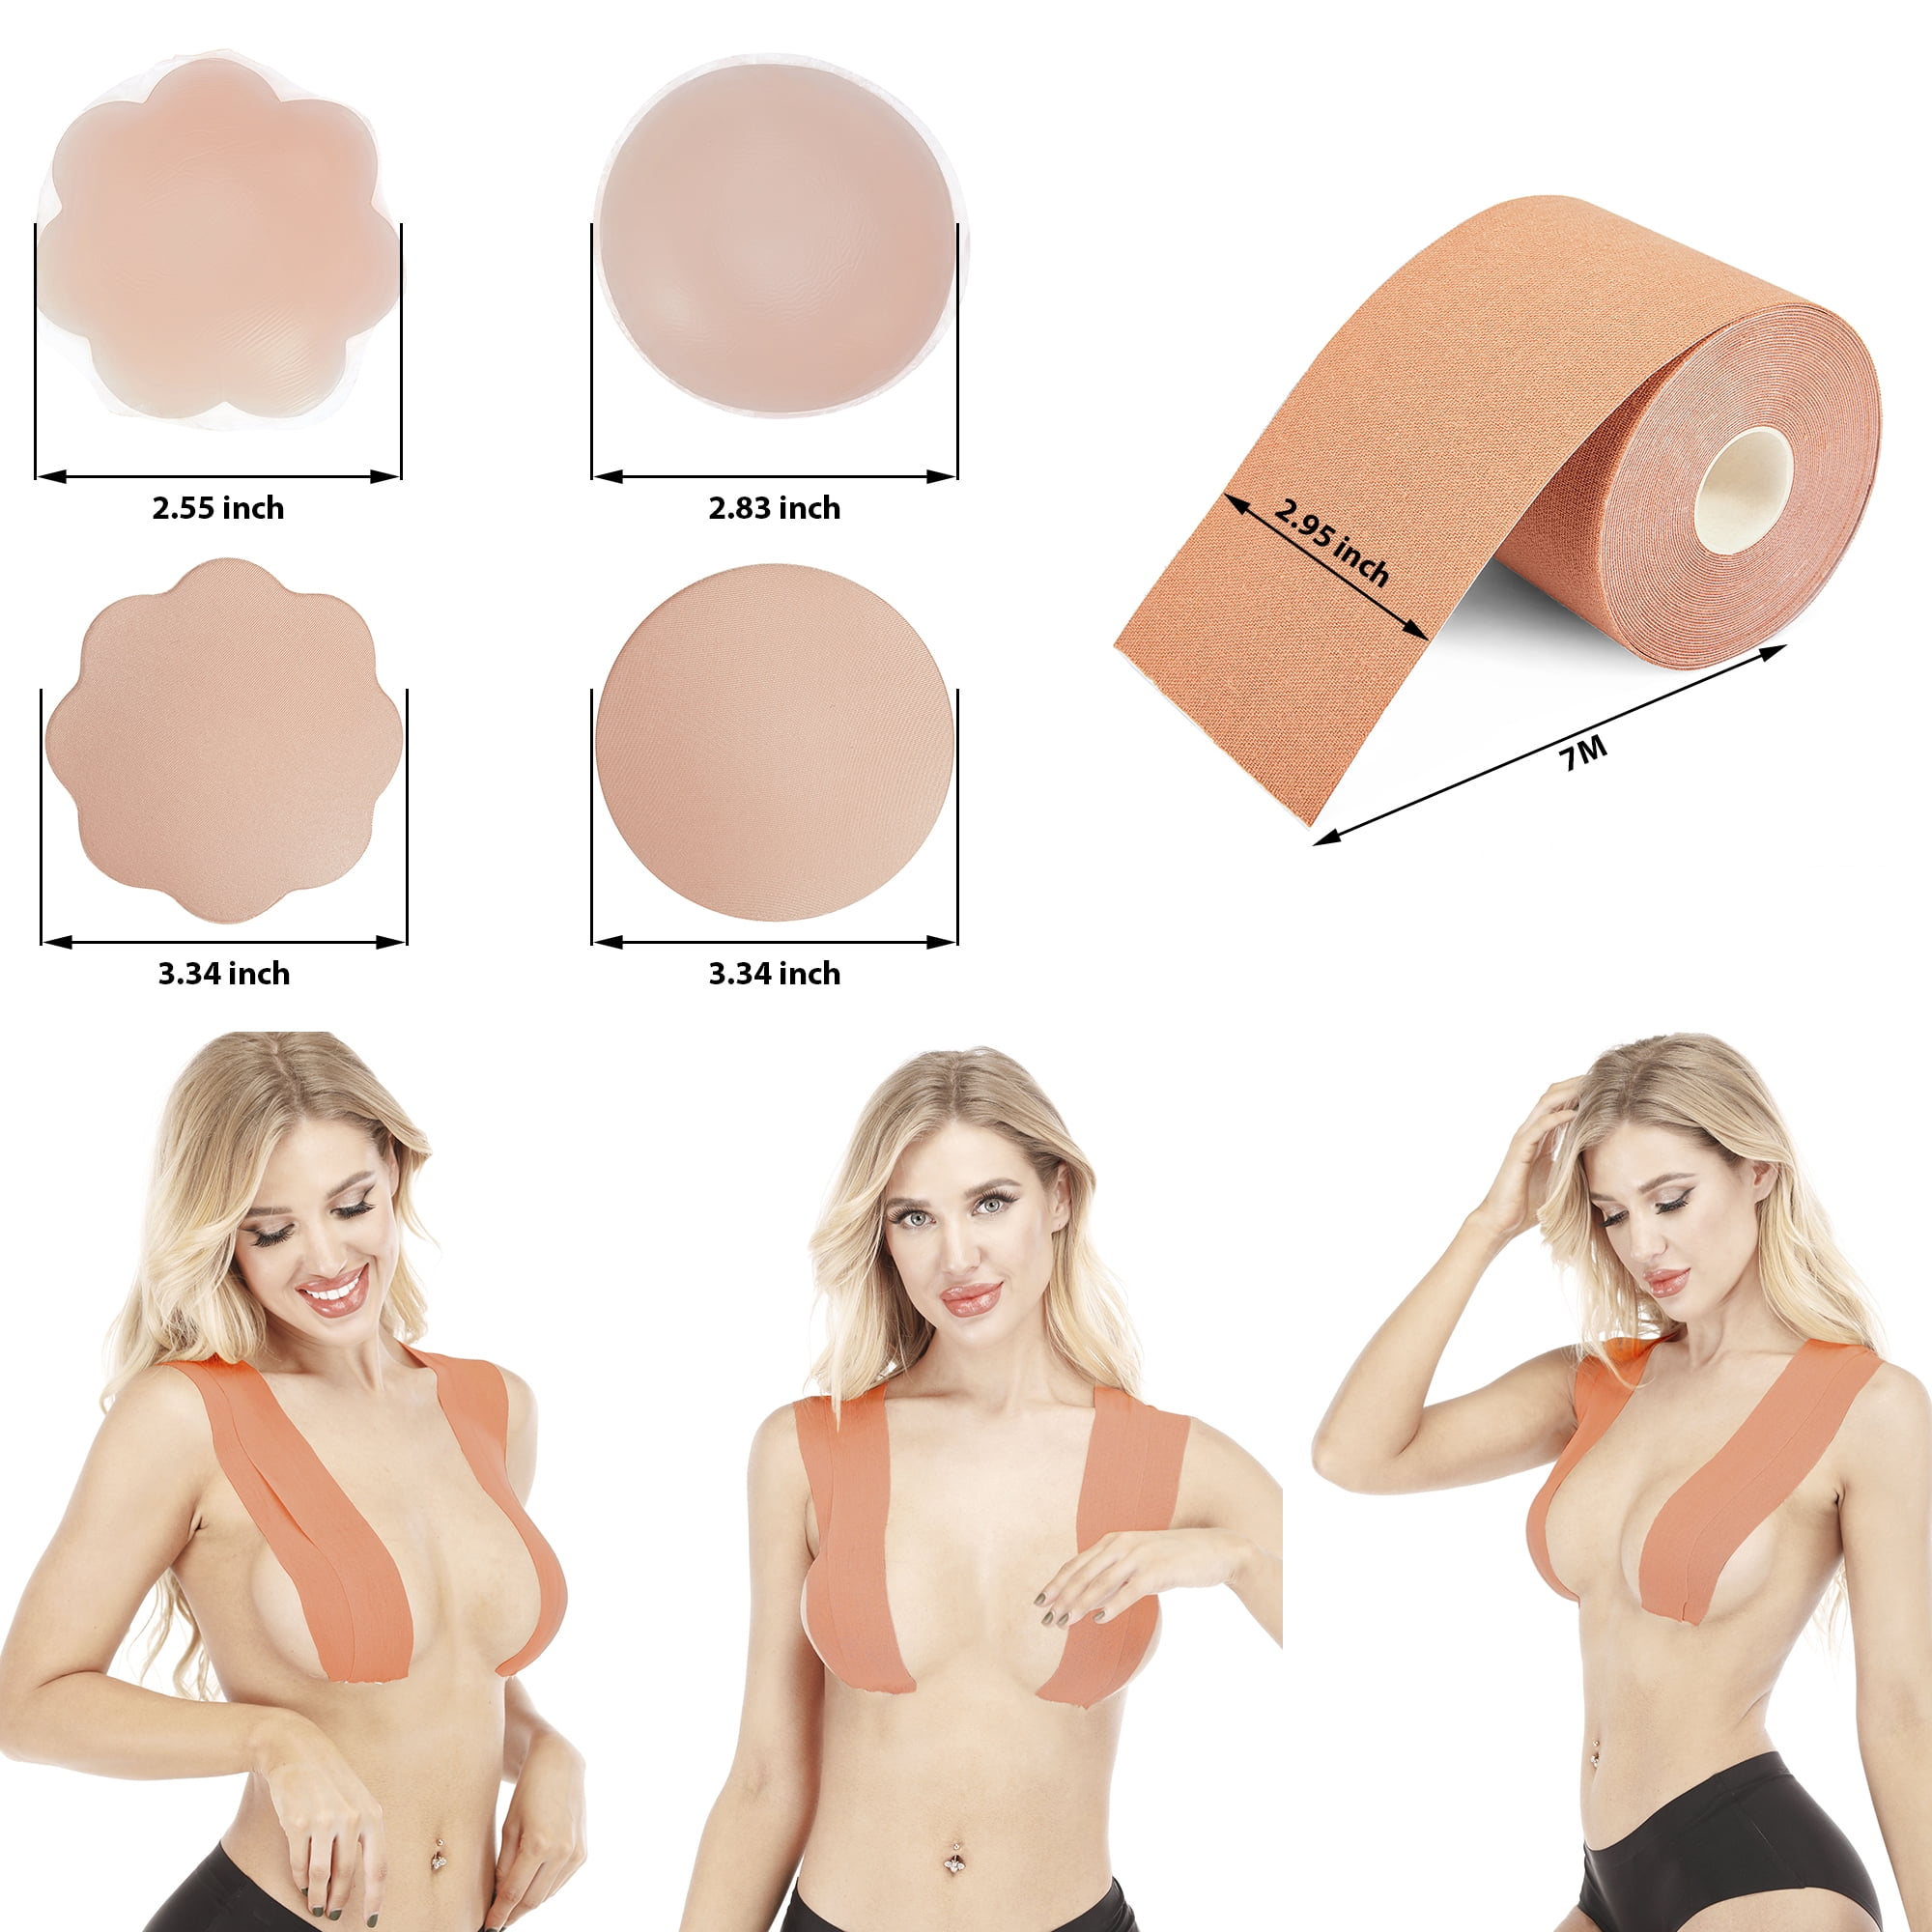 Shihen Women No-Bounce Breast Implant Stabilizer and Chest